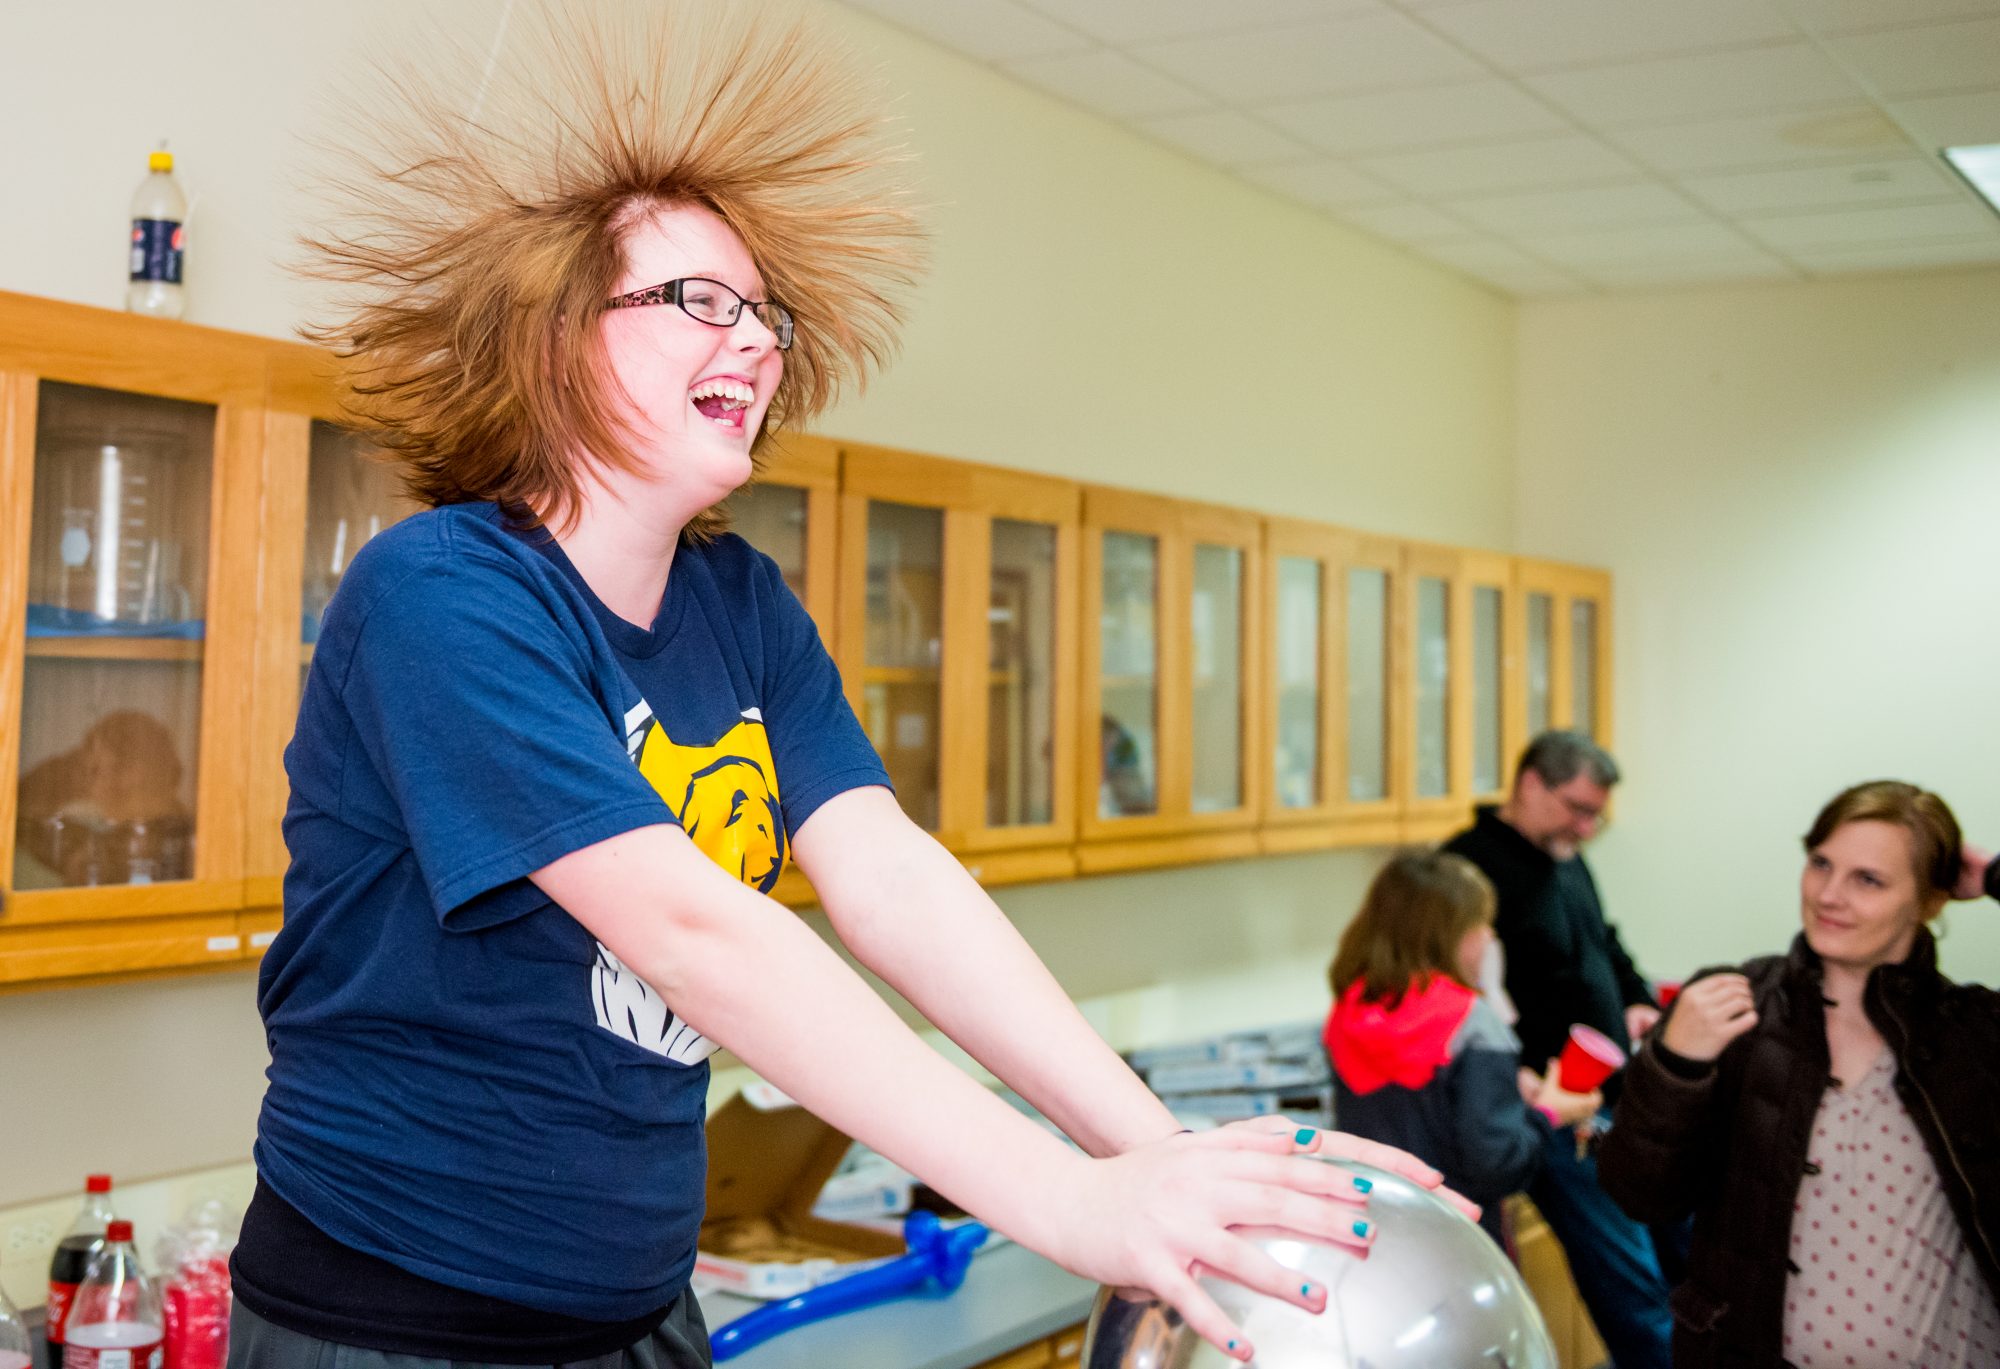 A woman in a physics classroom demonstrates the effects of the Van de Graaff generator.